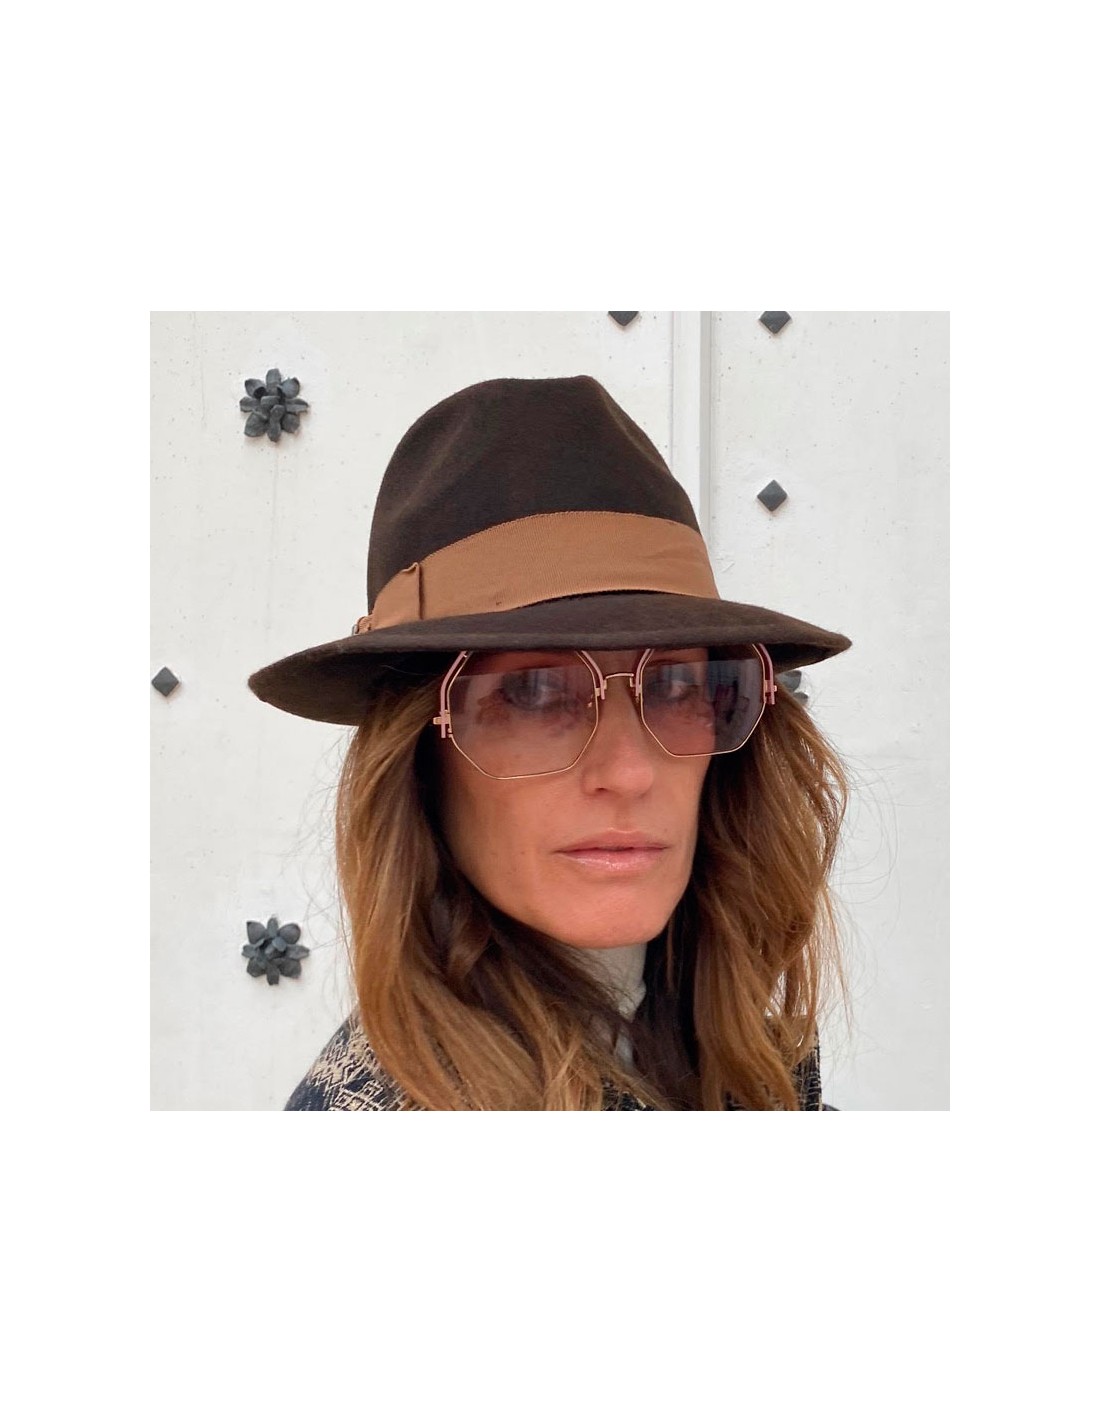 https://www.raceuhats.com/4934-thickbox_default/brown-mission-hat-for-women-short-wing.jpg